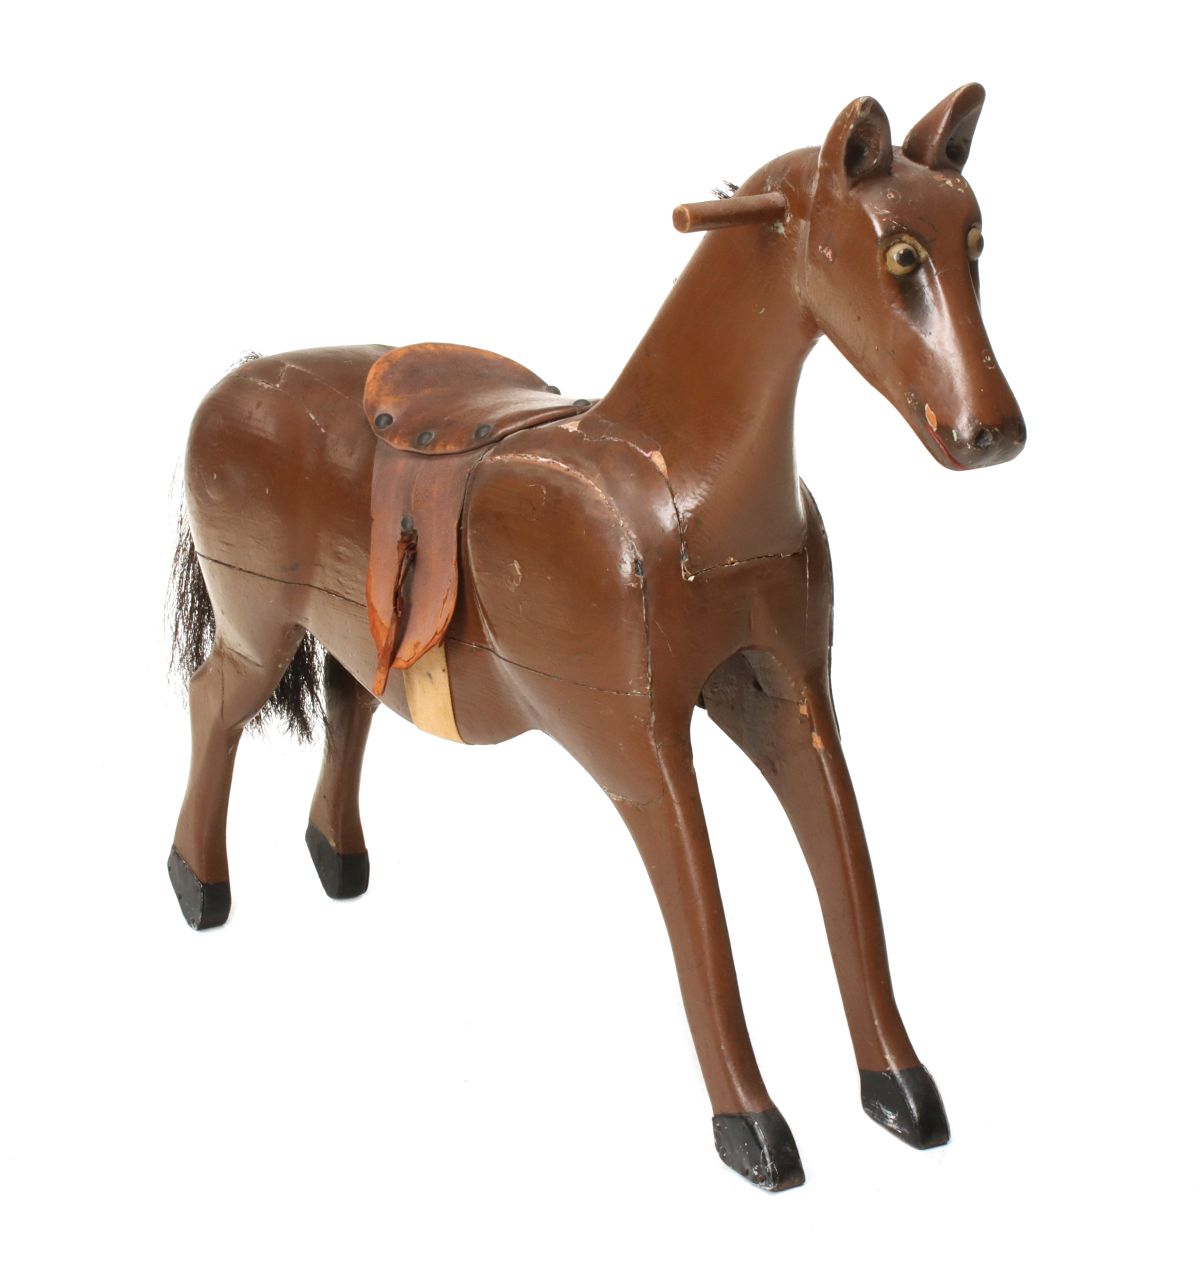 AN EARLY 20C. JOINED AND CARVED WOOD RIDE-ON TOY HORSE